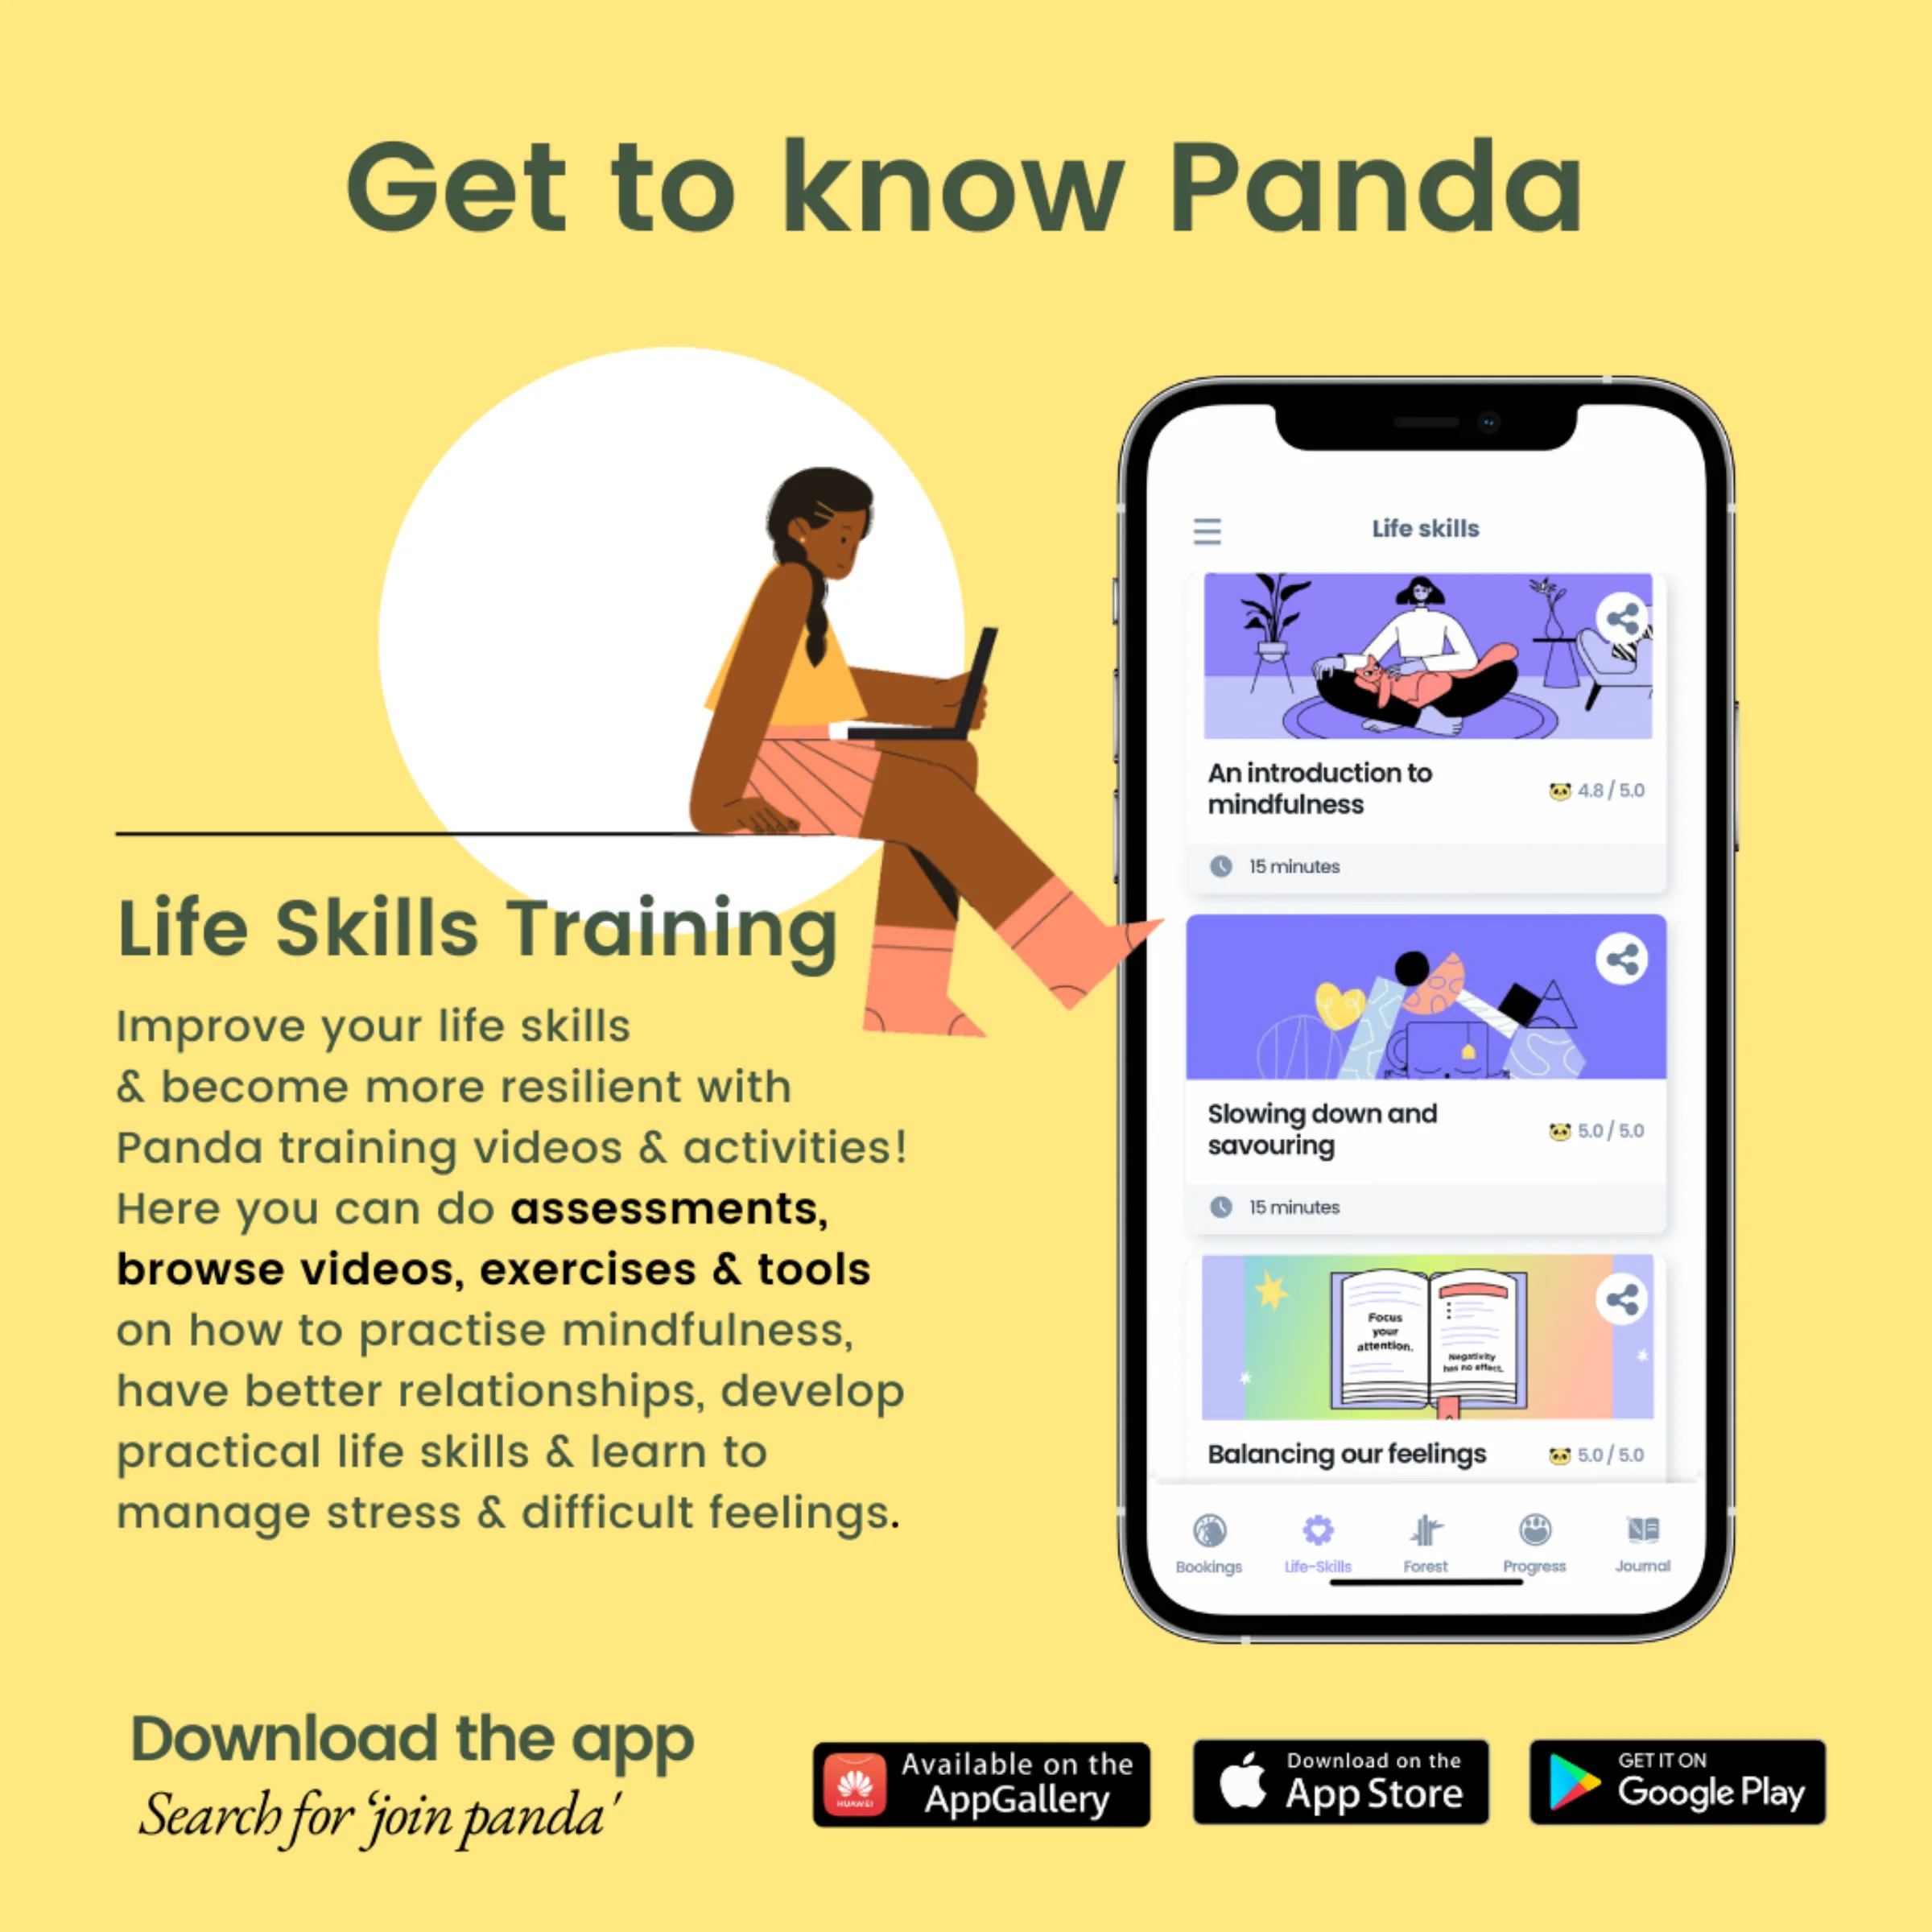 A screenshot from the Panda mental health application invites users to improve their life skills training through assessments, videos, exercises and tools.